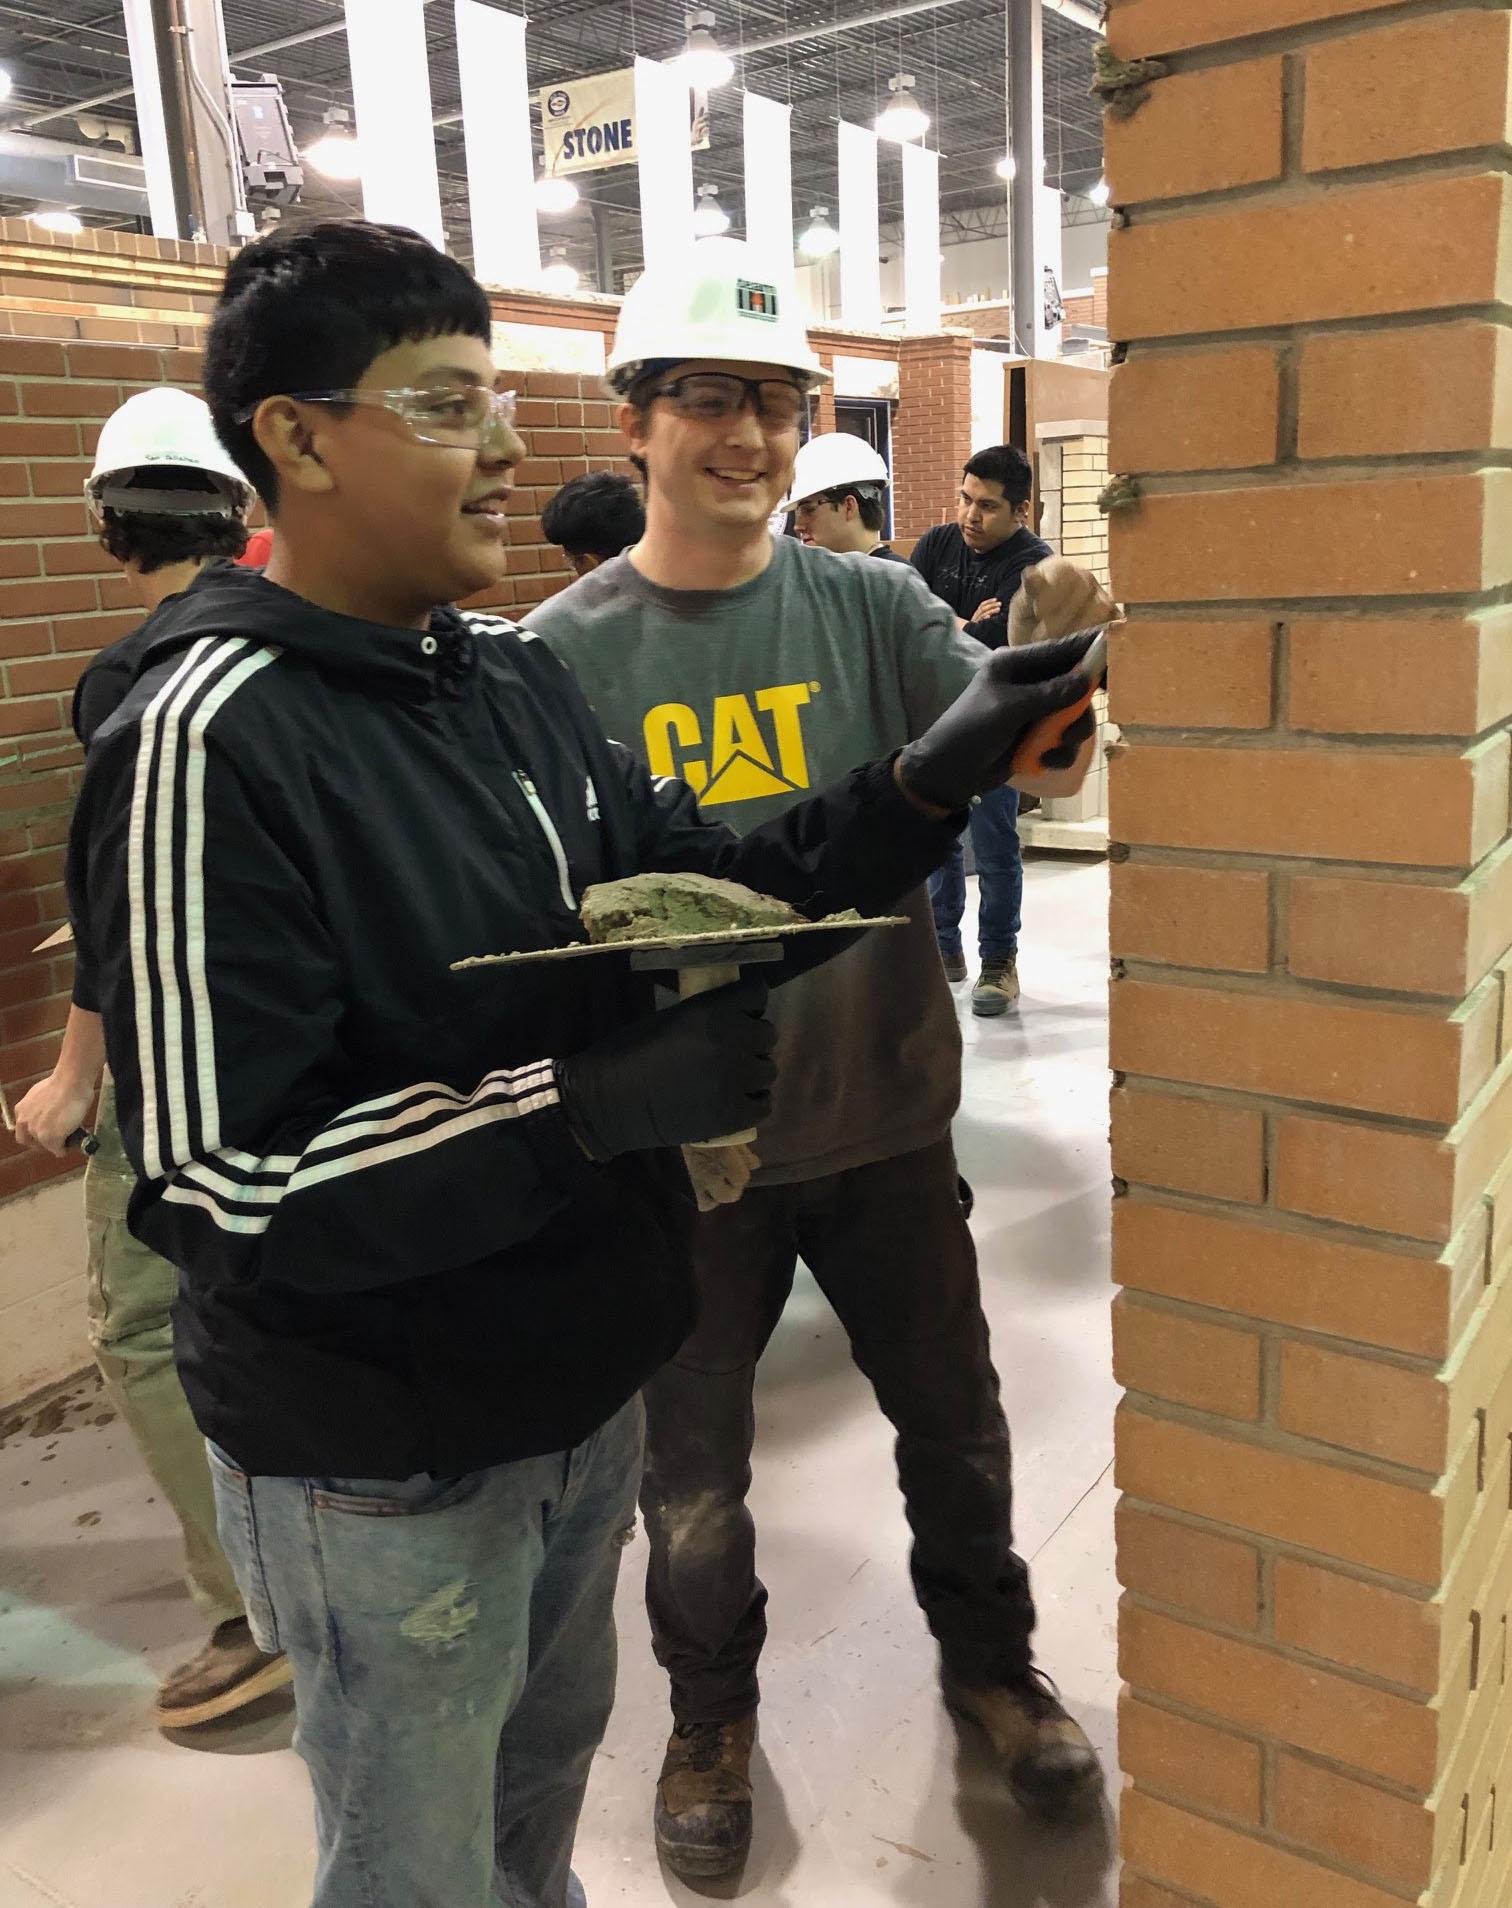 Students in Addison Trail’s Building Trades 2 and School to Work classes visit District Council Training Center in Addison